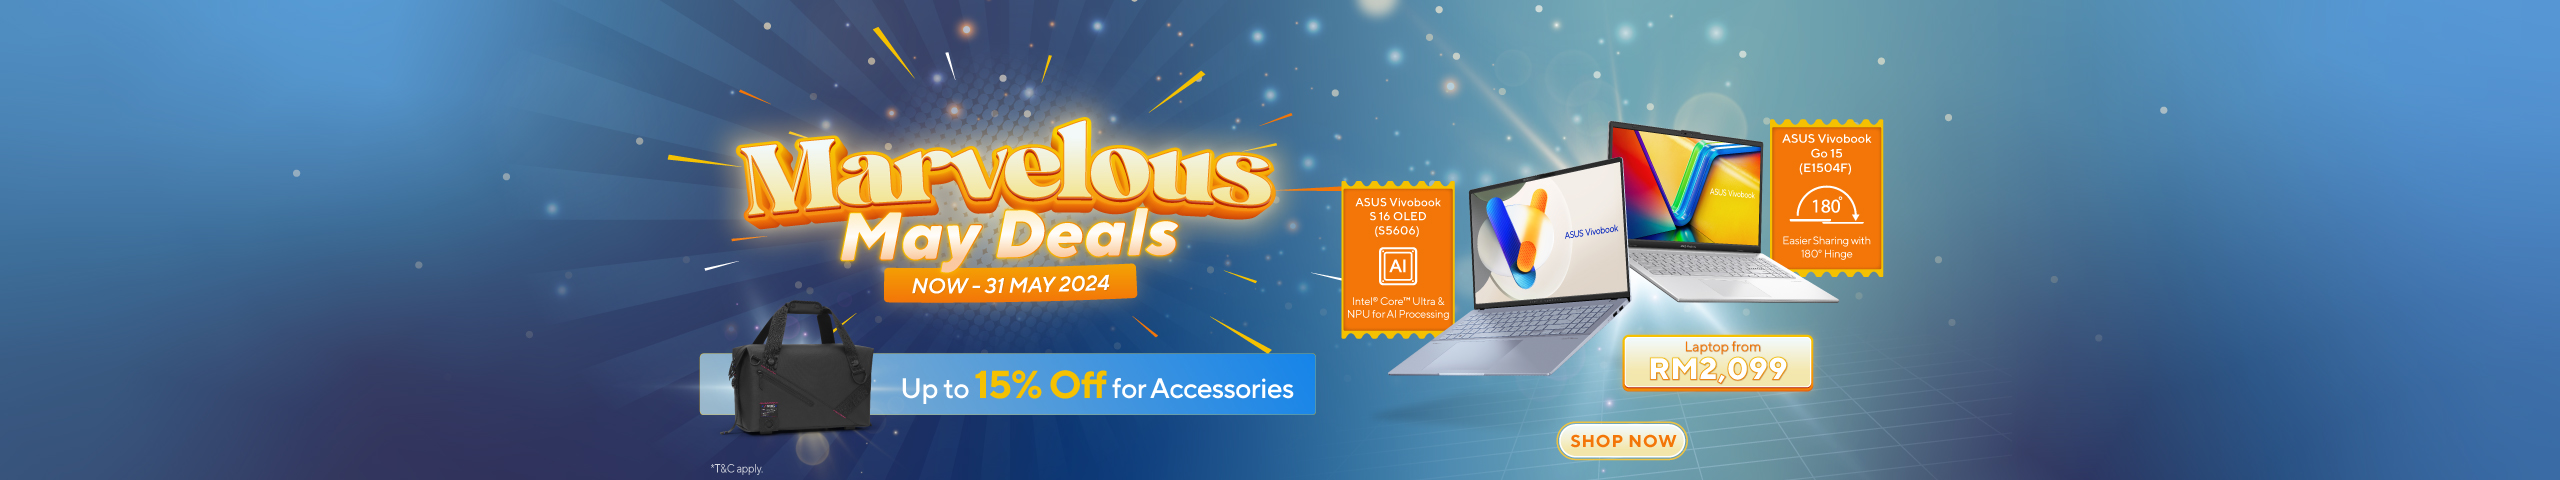 Marvelous May Deals 2024, compact and super-durable laptop from rm2099, accessories up to 15% off